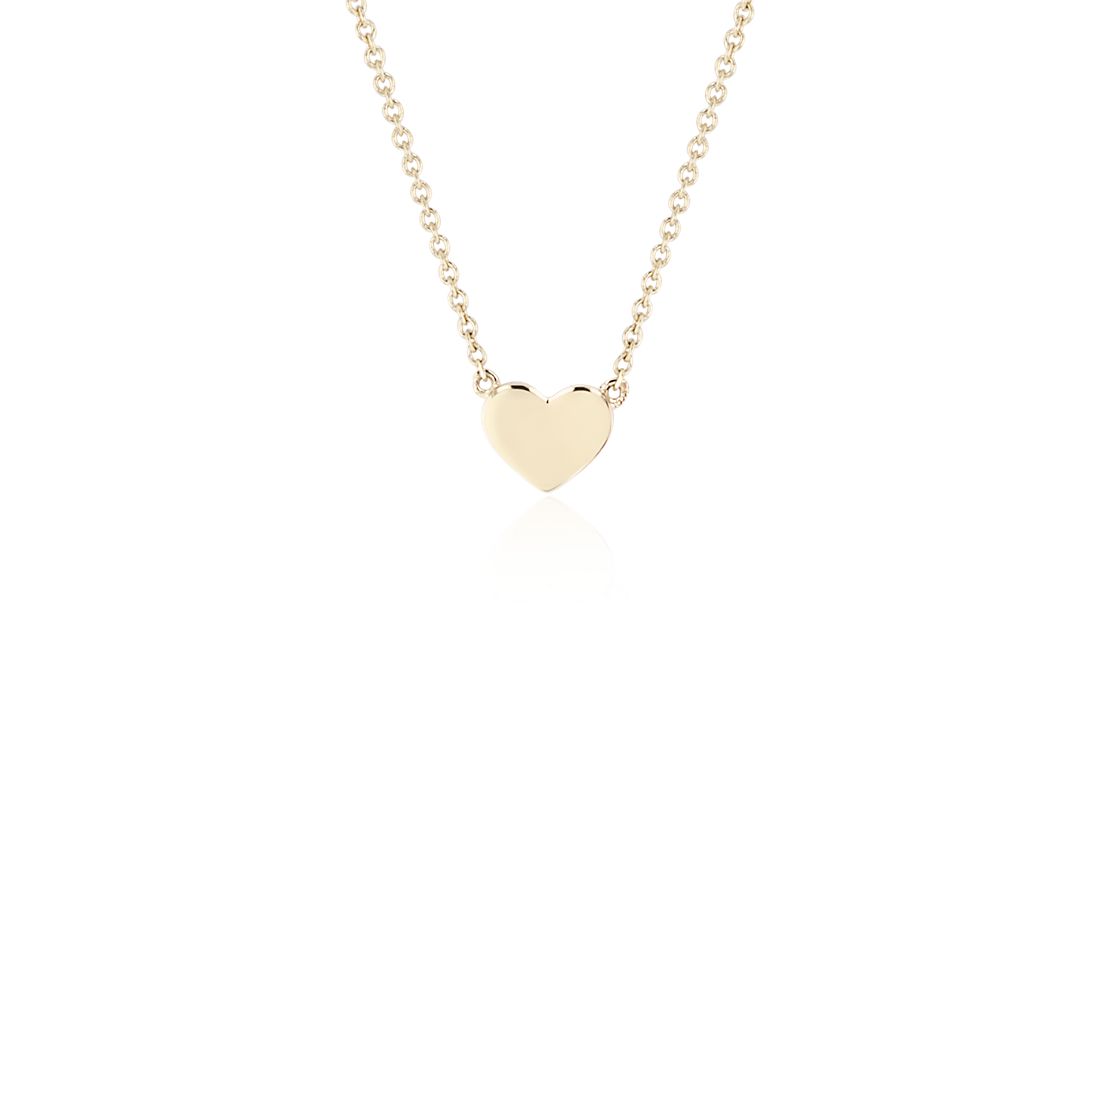 Petite Heart Necklace in 14k Yellow Gold